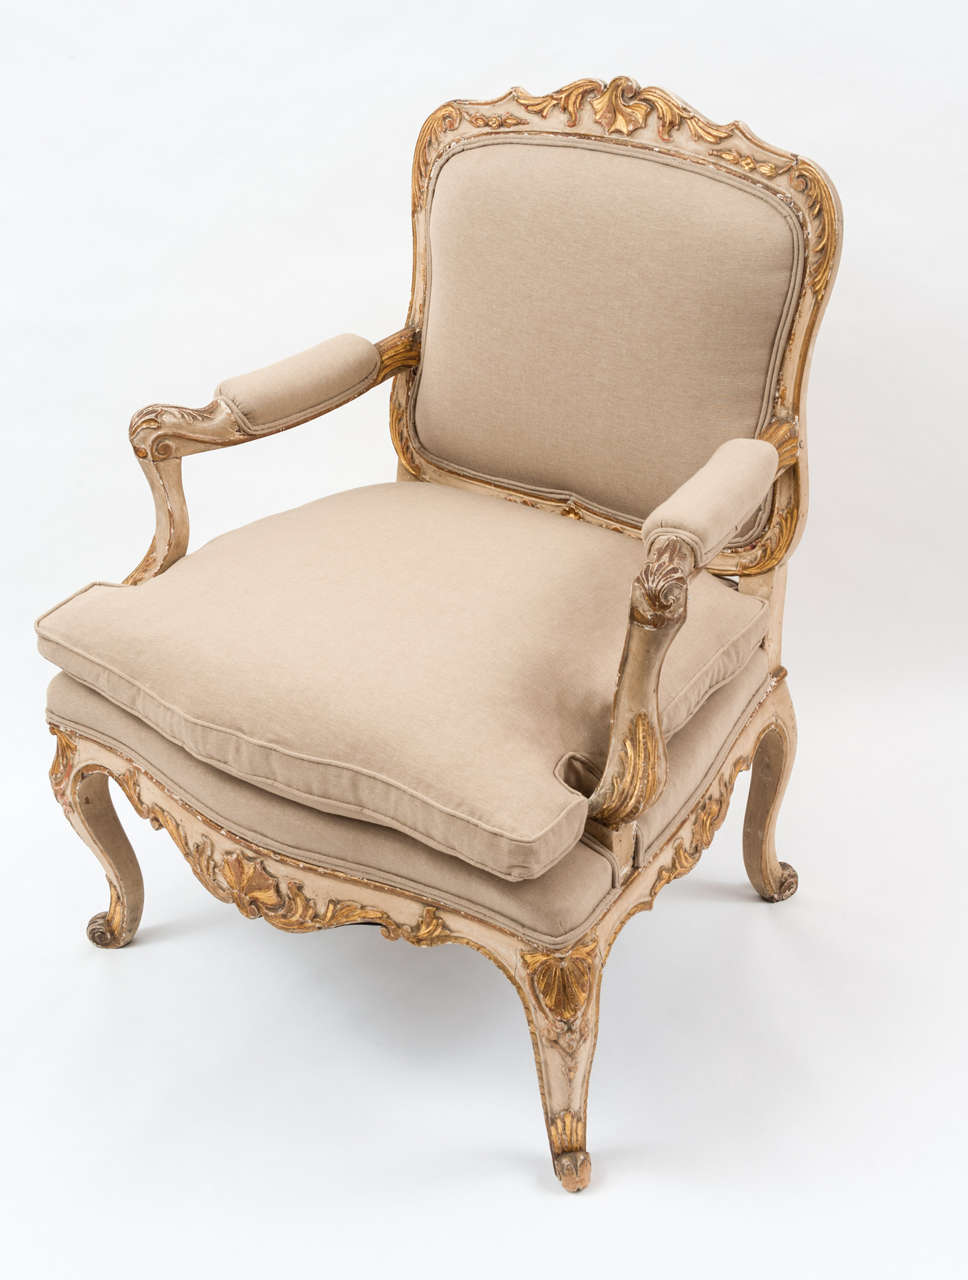 An Italian upholstered armchair from the late 18thc, with bags of charm in its original paint and gilt finish.